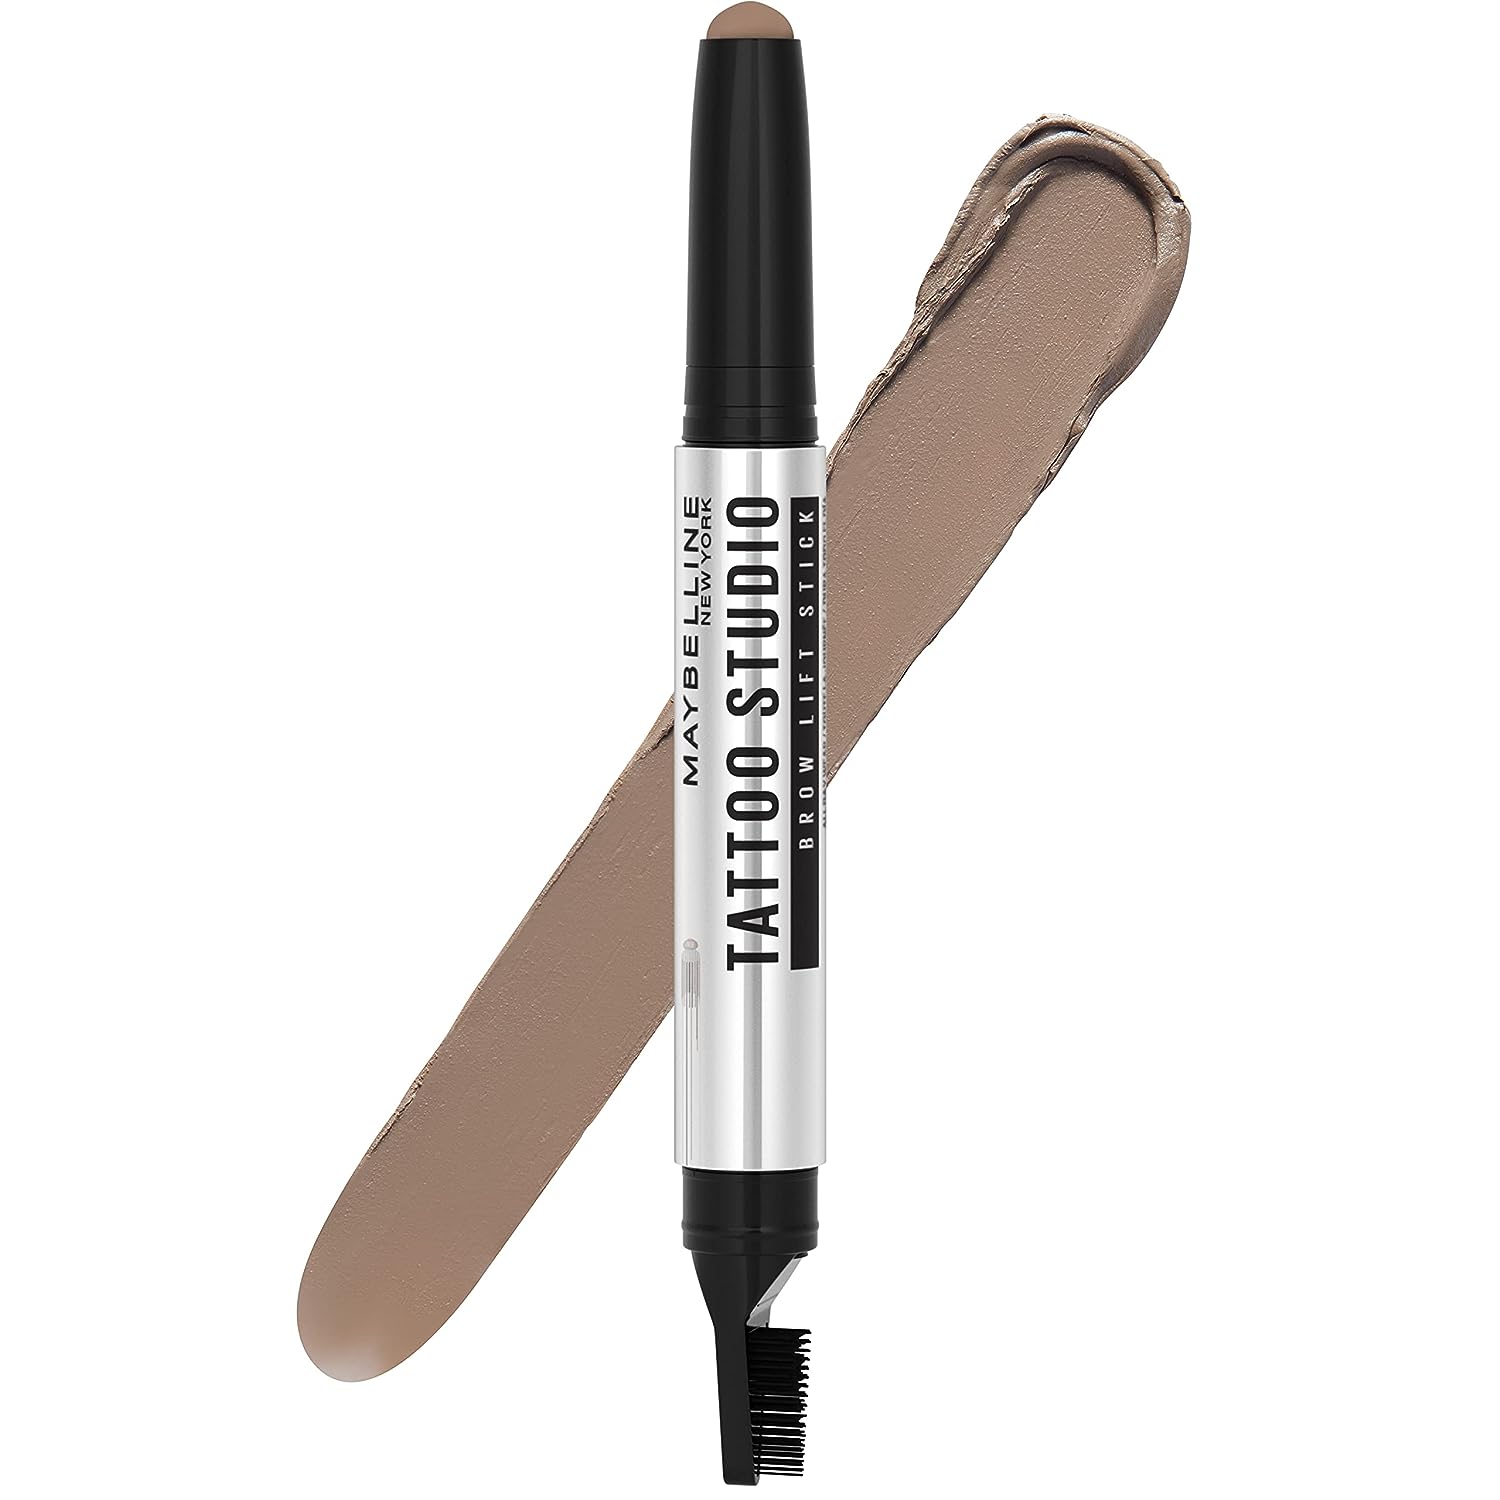 Maybelline New York TattooStudio Brow Lift Stick Makeup with Tinted Wax Conditioning Complex, Blonde, 1 Count